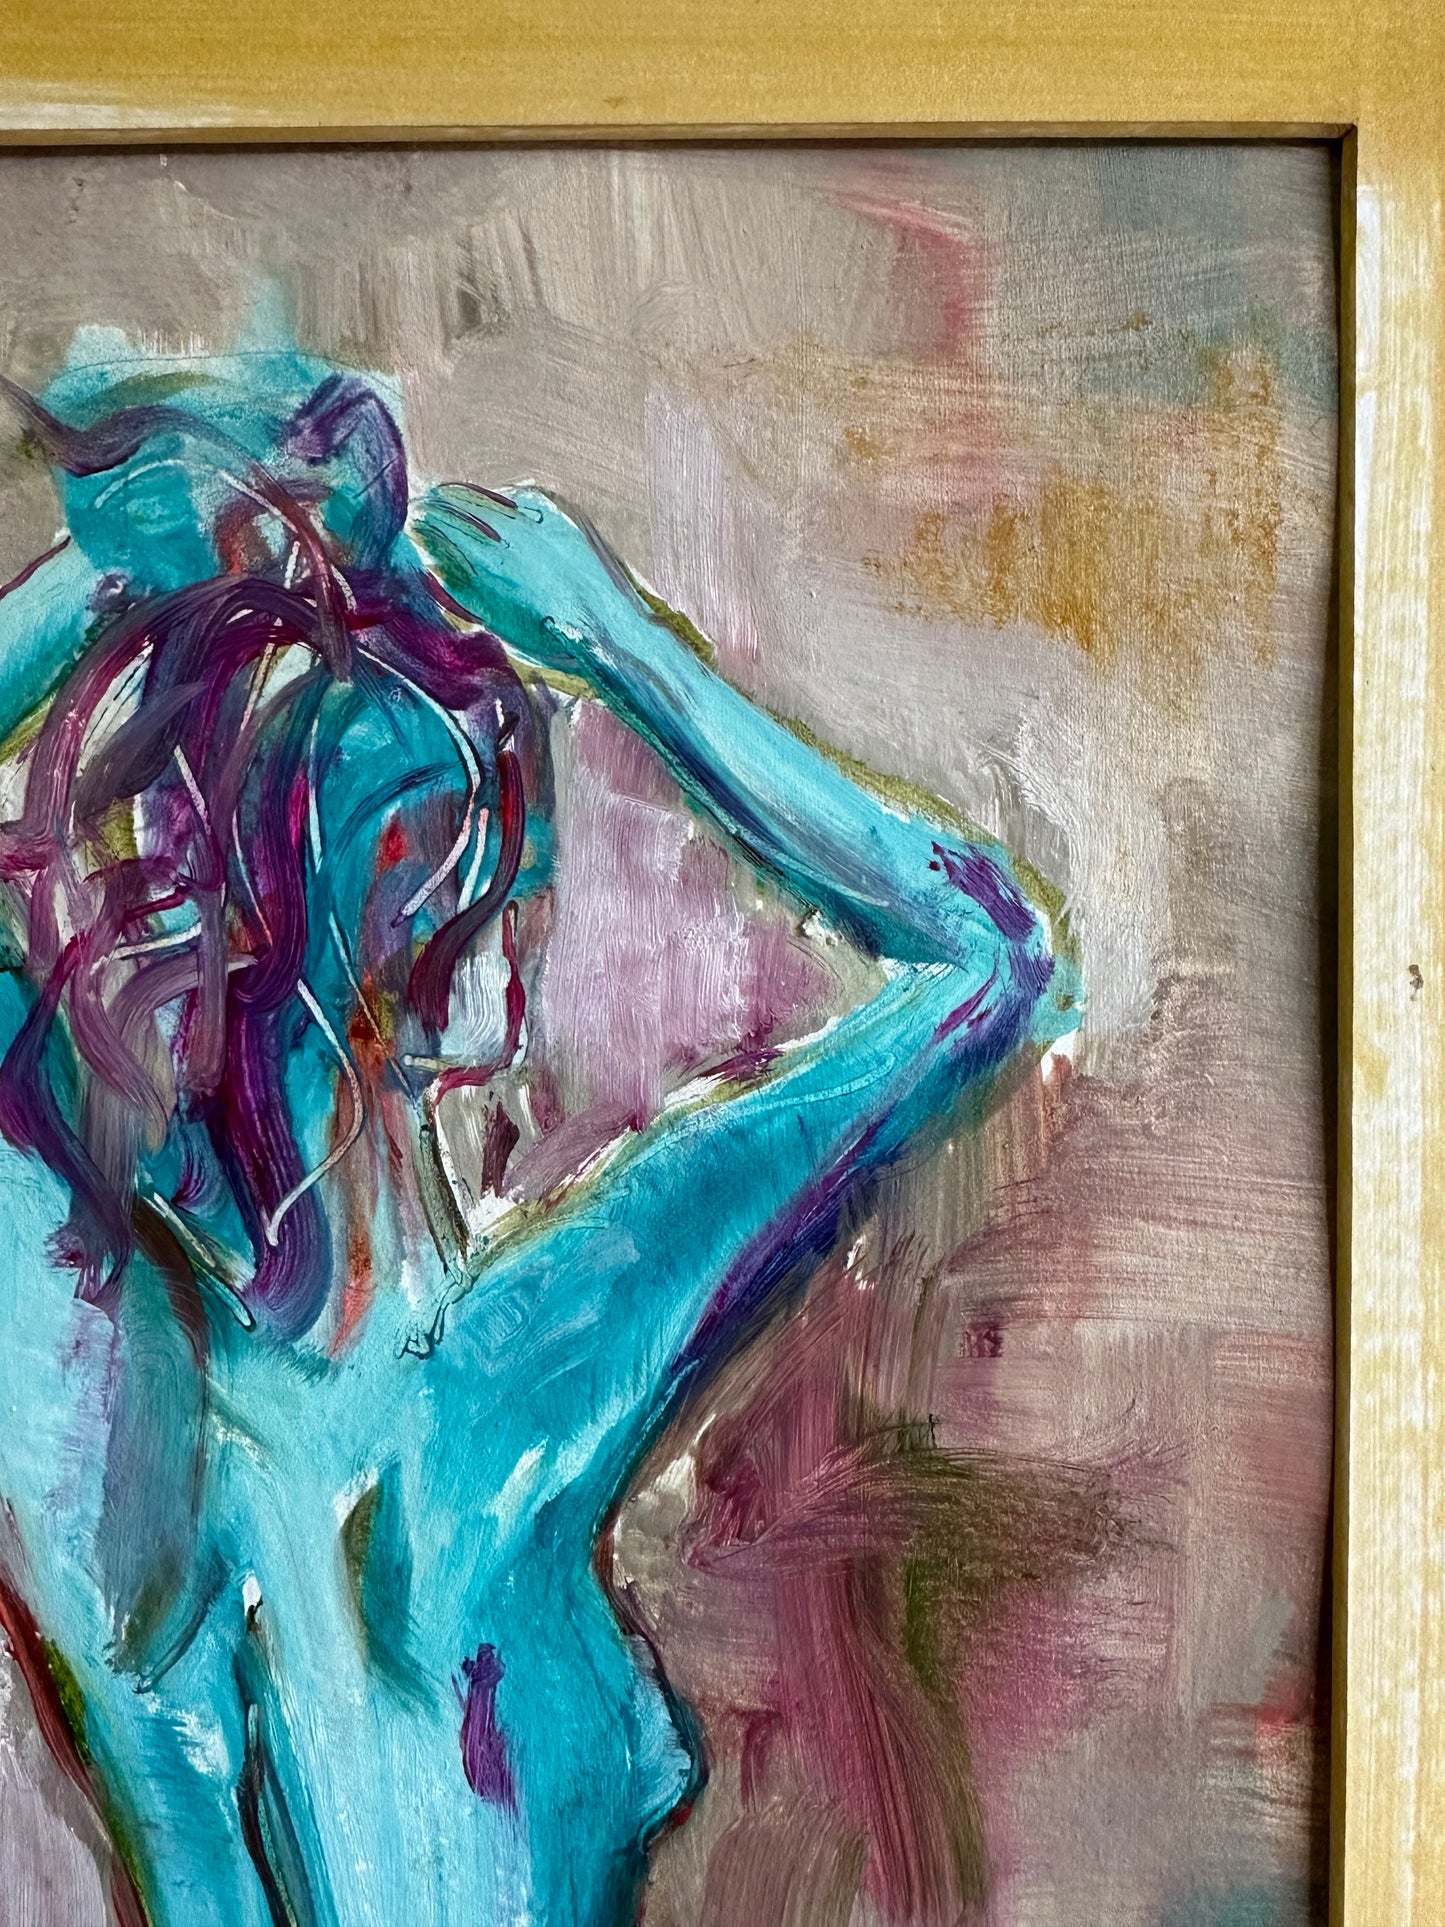 Nude study in Turquoise #1